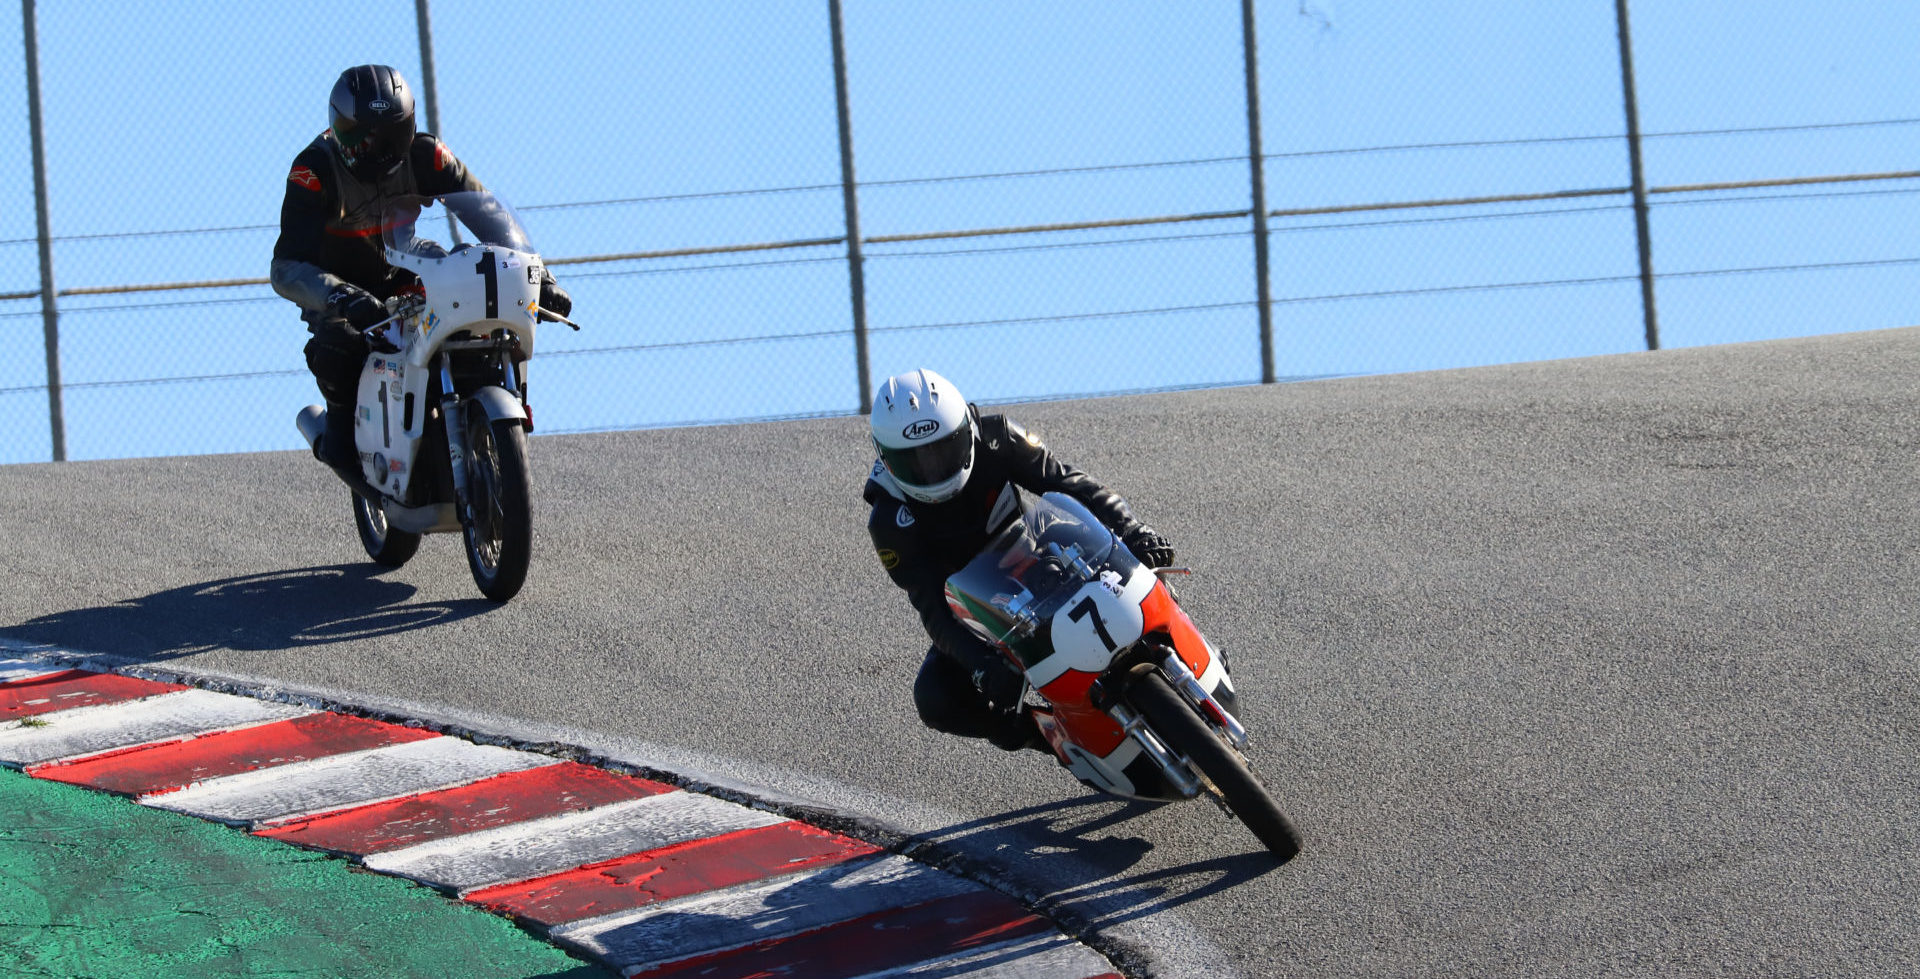 Dave Roper (7) leads Andrew Mauk (1) down the Corkscrew at WeatherTech Raceway Laguna Seca on his way to victory in AHRMA Vintage Cup Round Two. Photo by etechphoto.com, courtesy of AHRMA.